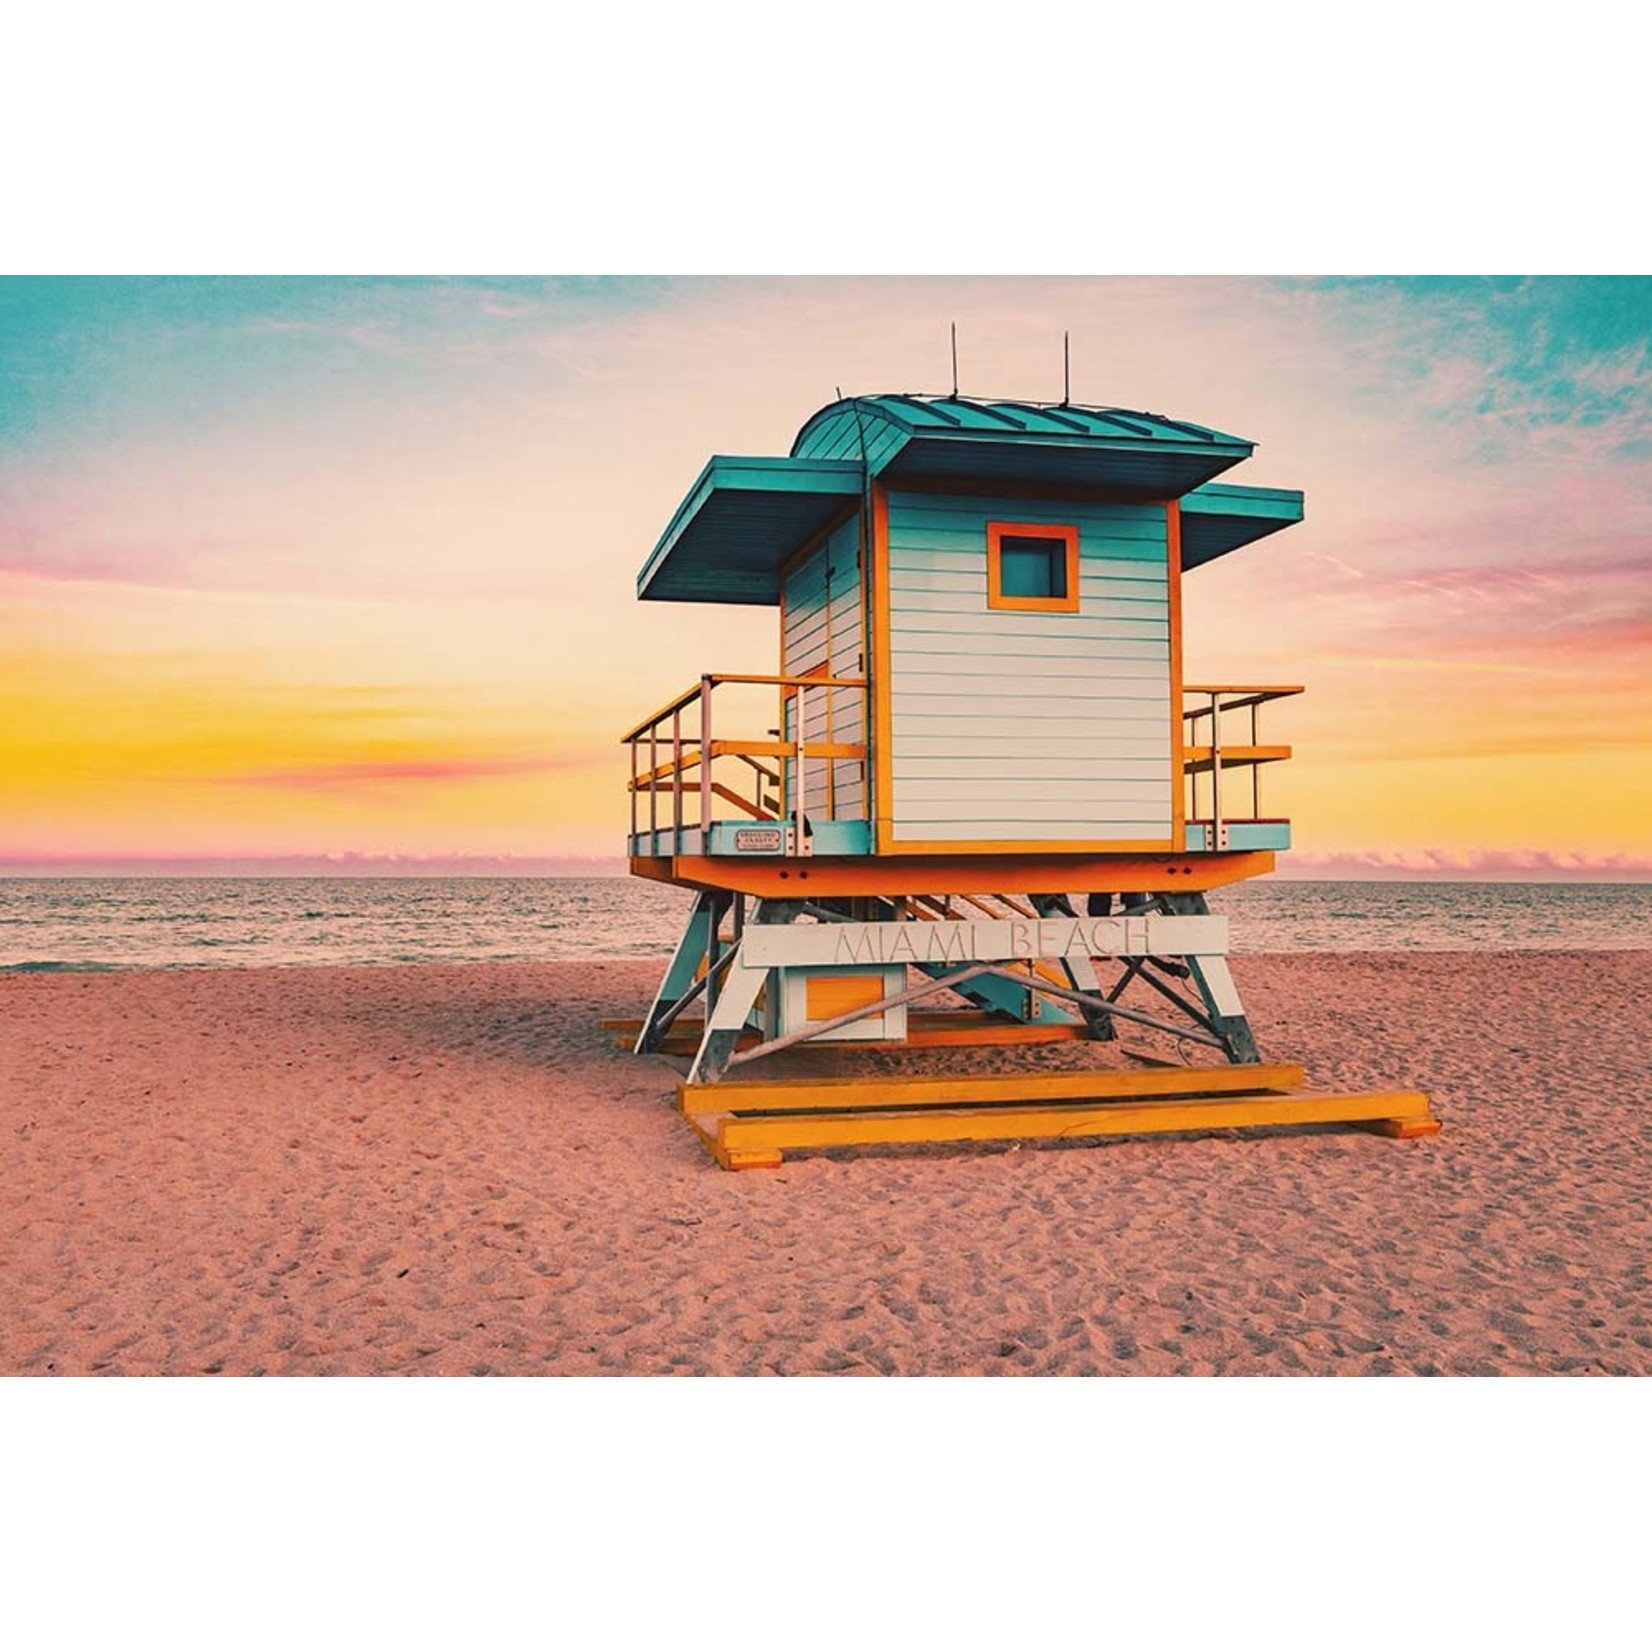 Framed Print on Rag Paper Colorful Miami Beach lifeguard tower 3 by Artur Debat via Getty Images Gallery